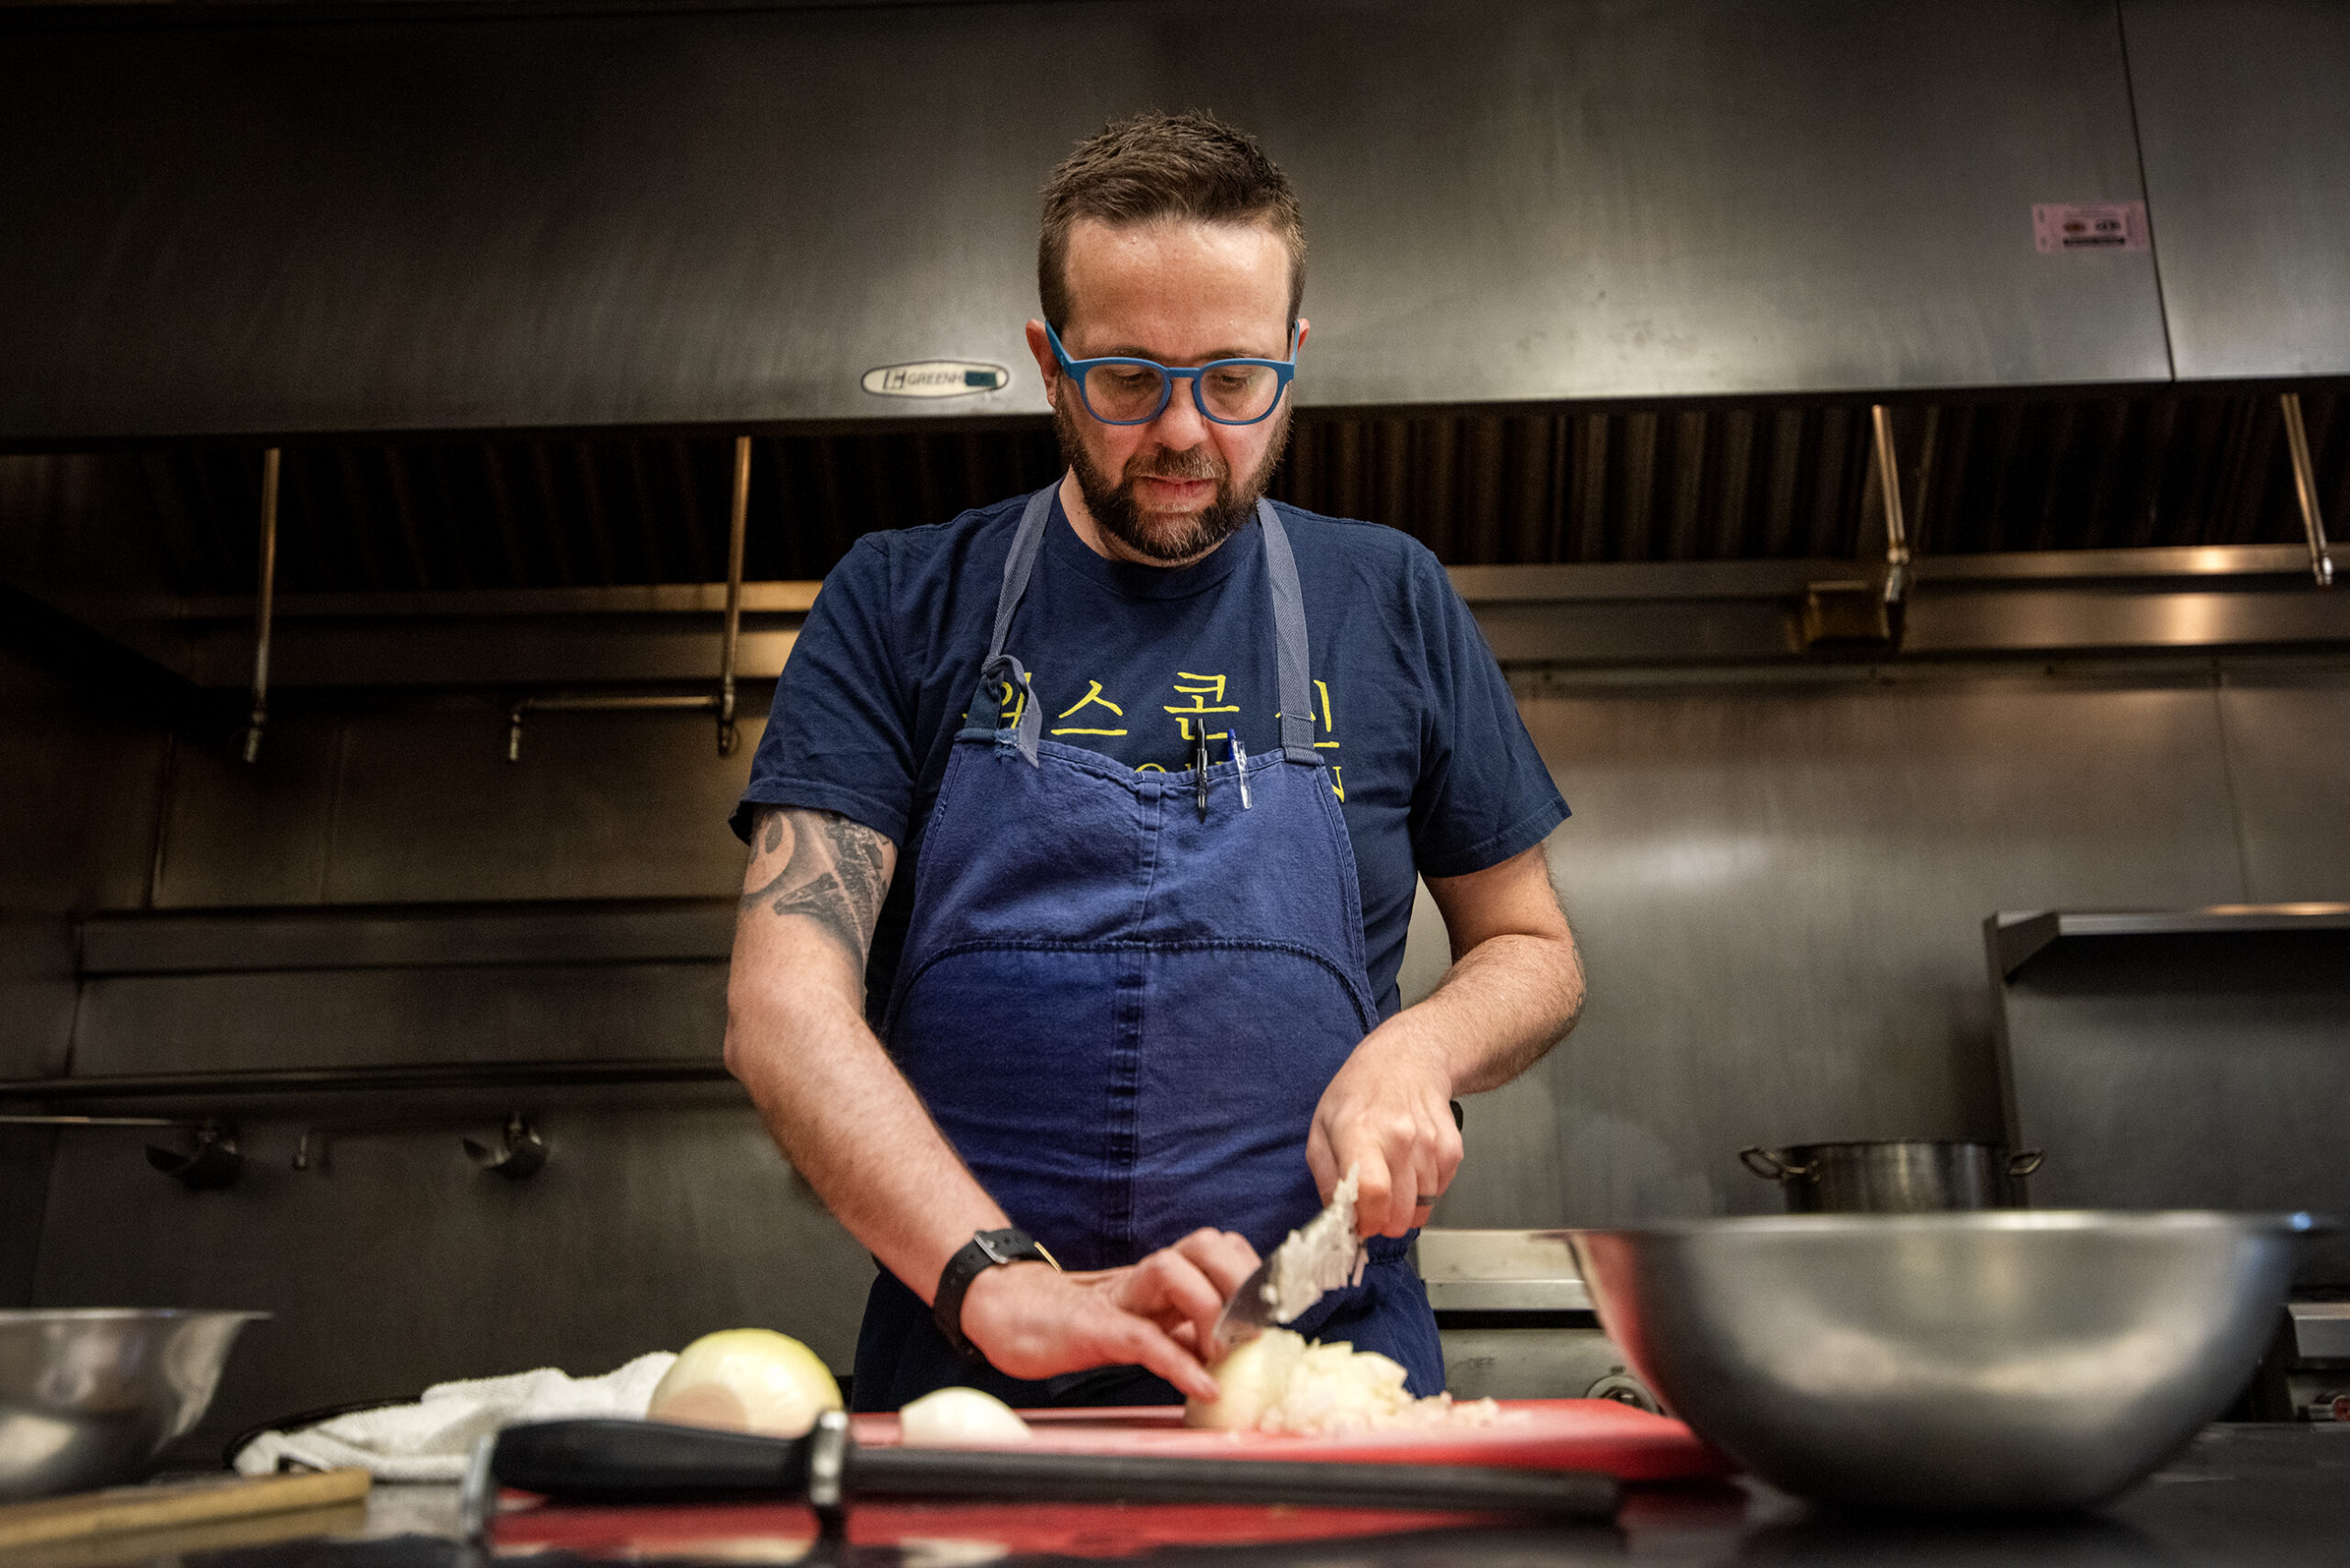 Chef Dan Jacobs does Wisconsin proud on ‘Top Chef’